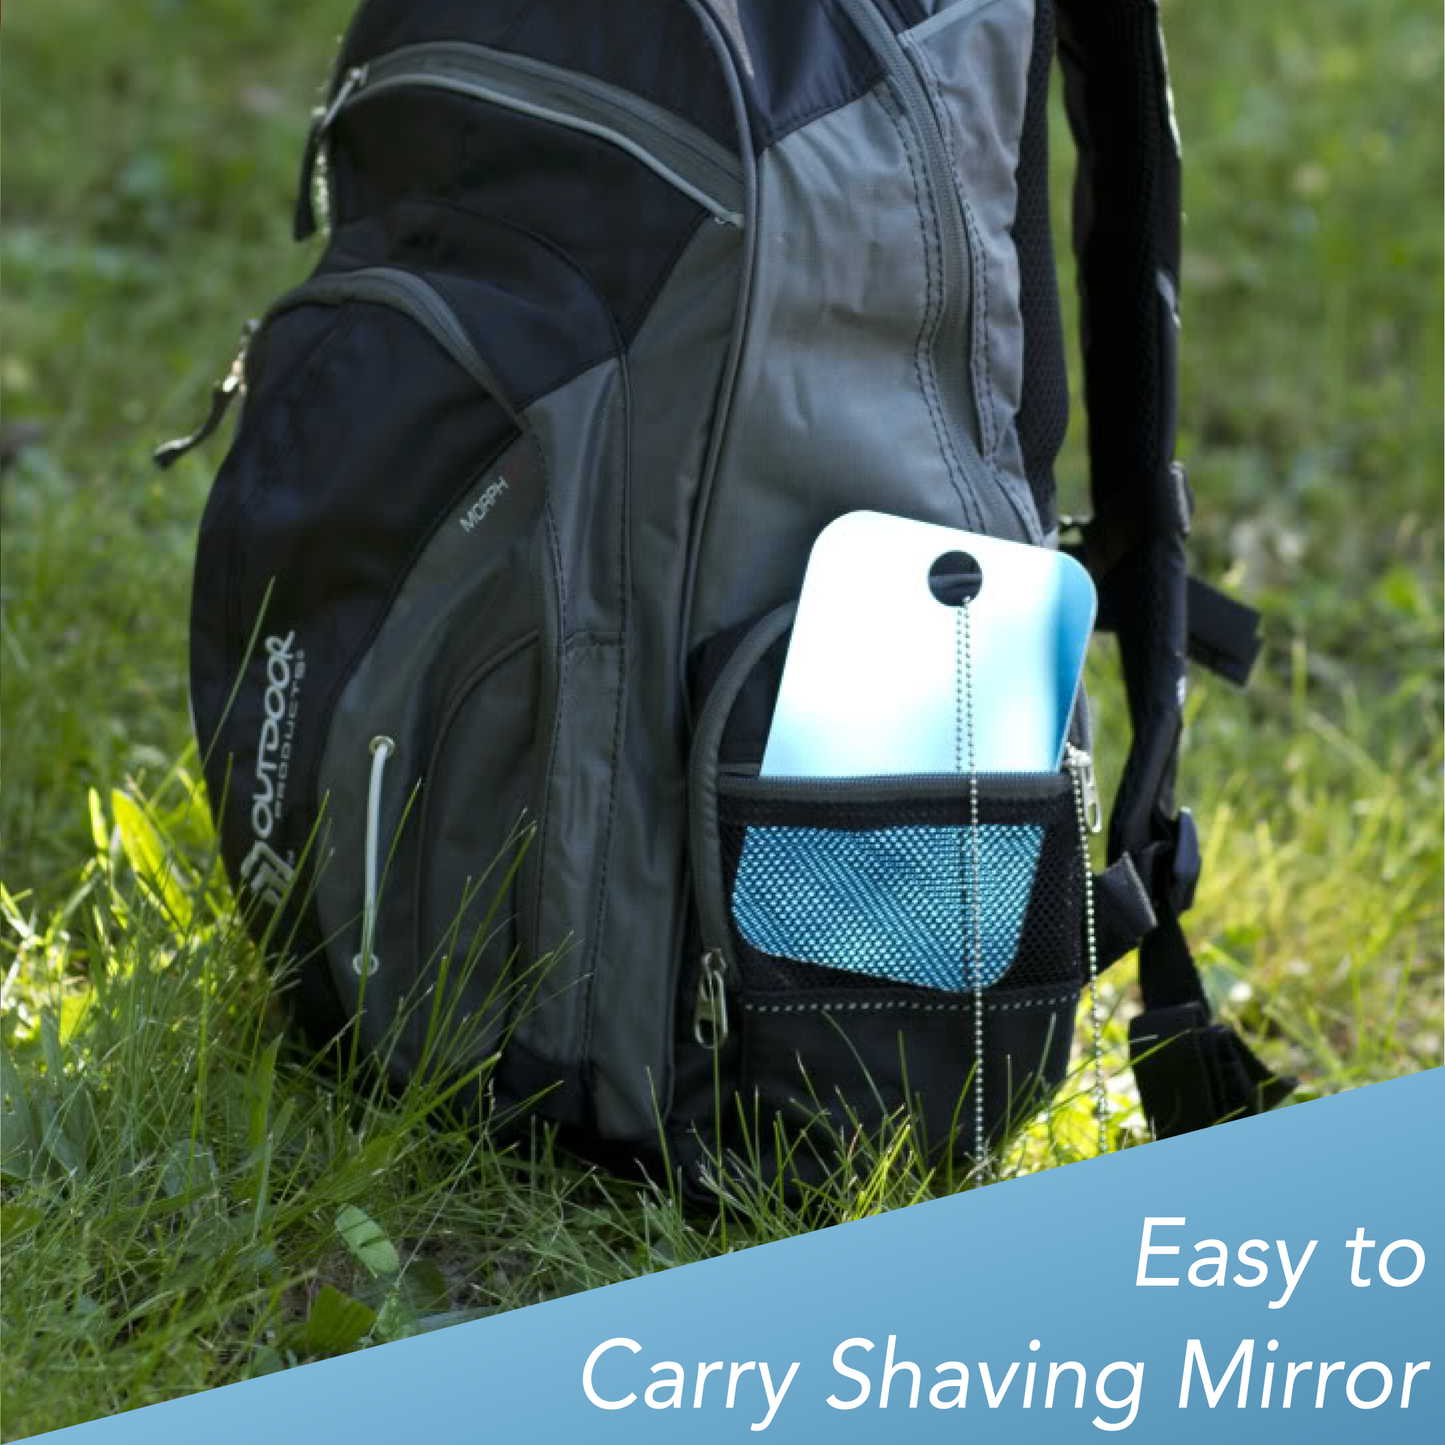 Shave Well Company Camping Mirror for Shaving, Signaling. Makeup